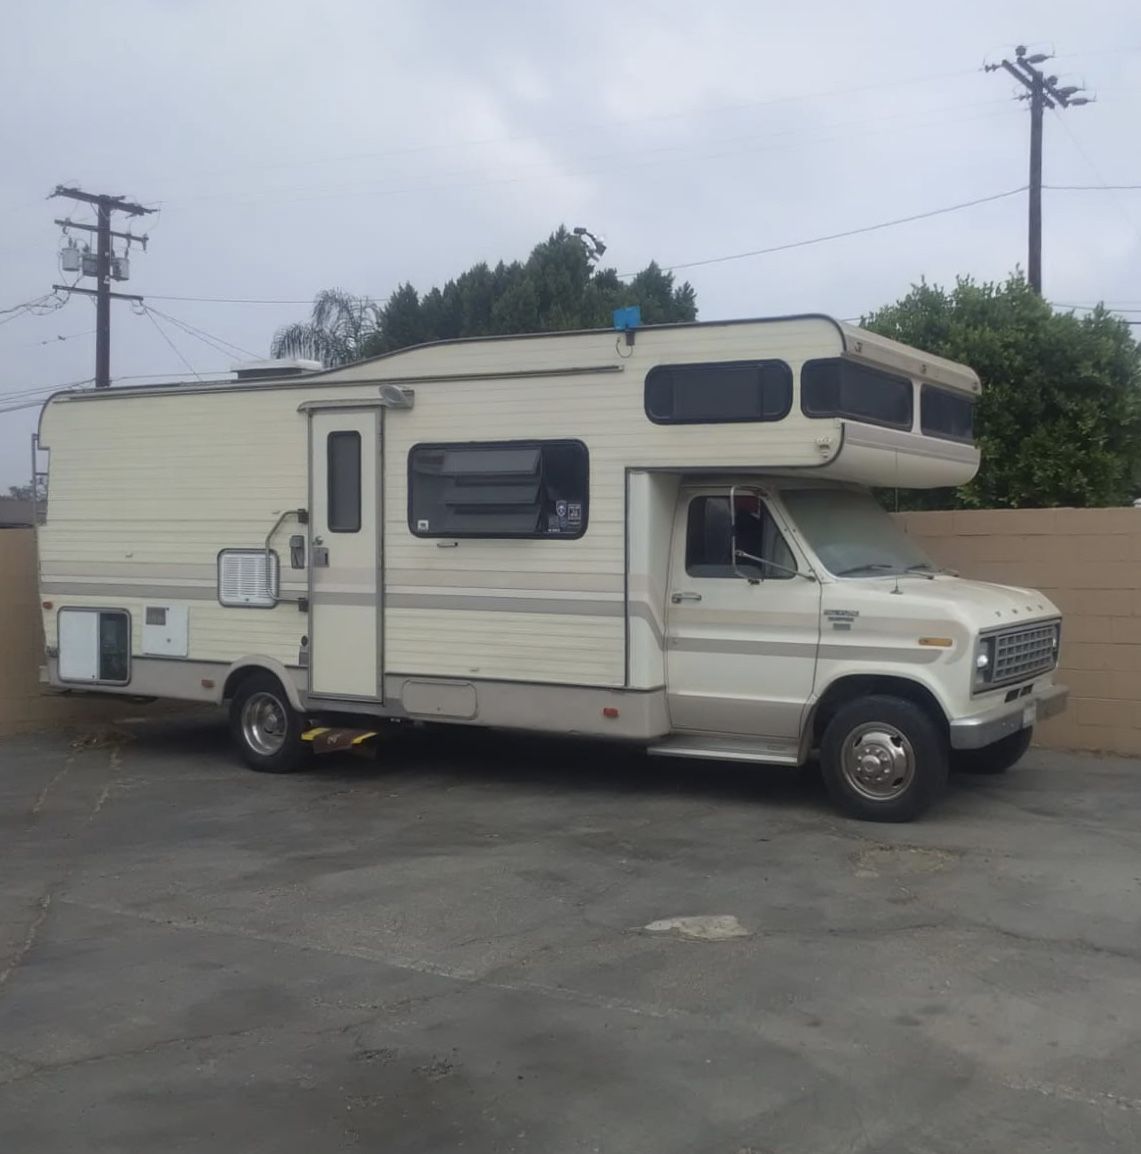 RV 1979 Ford roll along